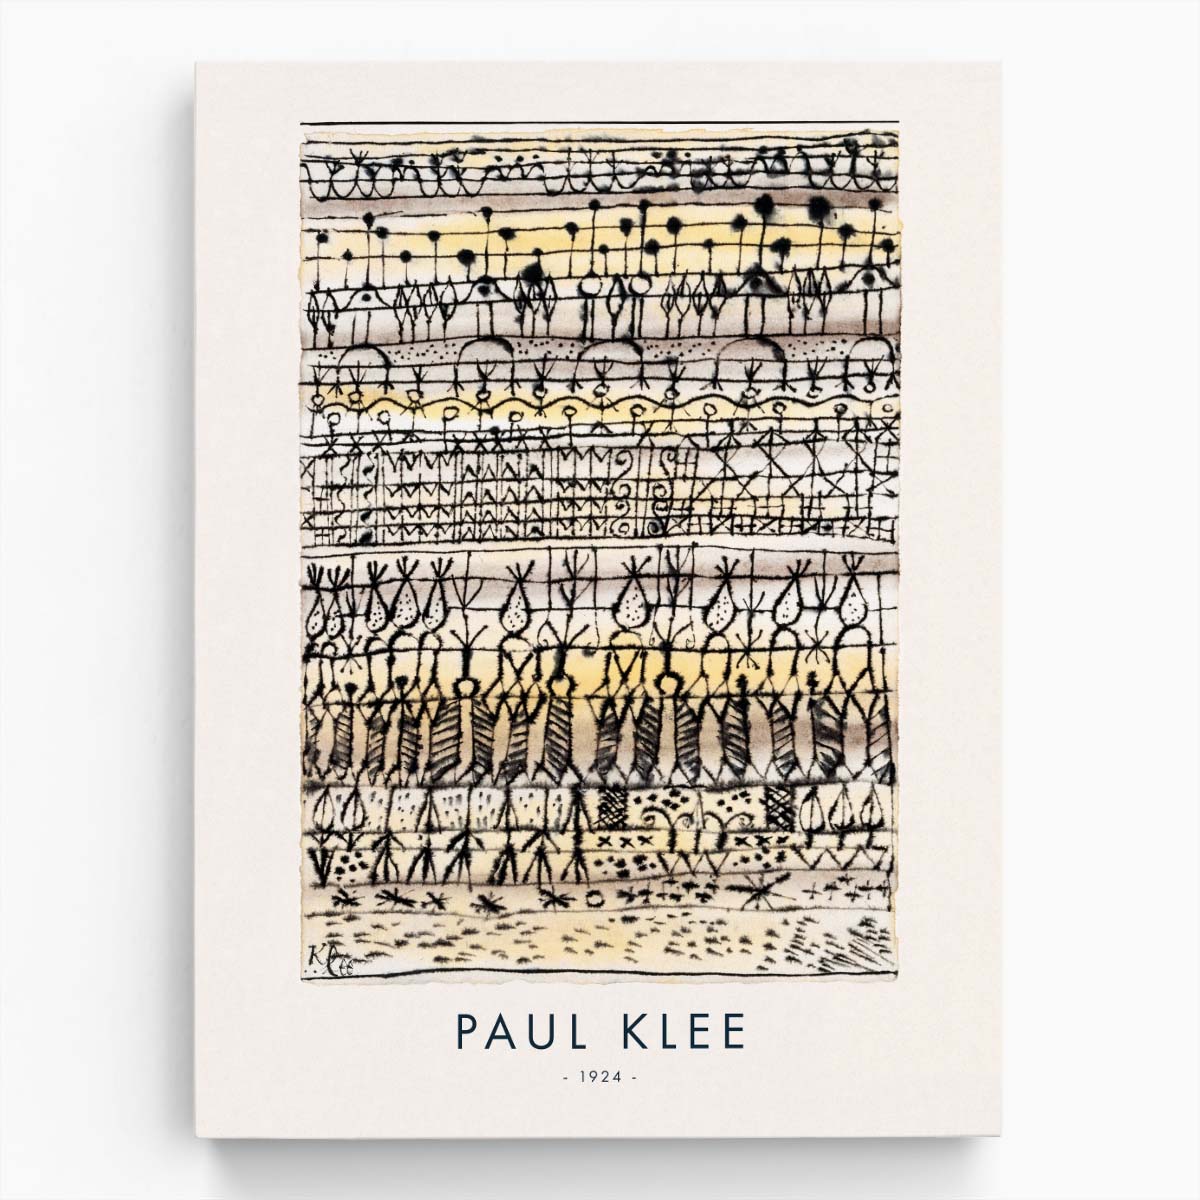 Paul Klee's 1924 Watercolor Illustration, Garden Abstract Art by Luxuriance Designs, made in USA